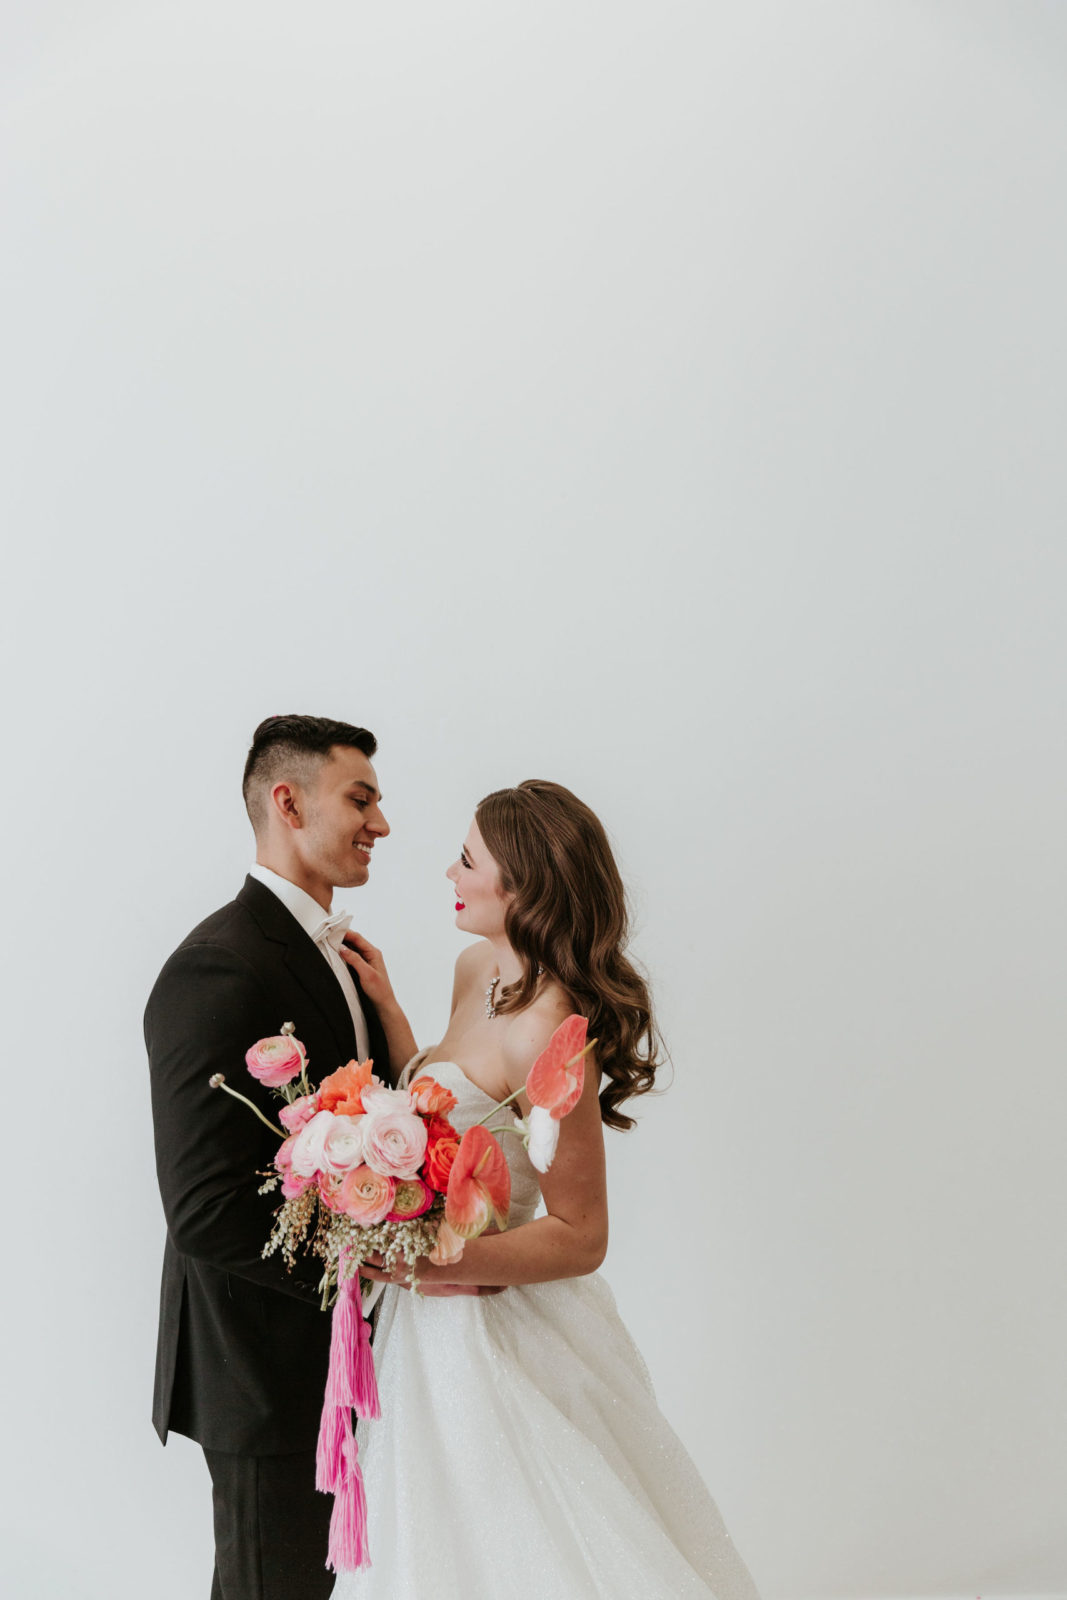 Modern and Glamorous Wedding Celebration Inspiration With A Pop of Pink | hot pink bridal bouquet, lazaro gown, tassels on bouquet